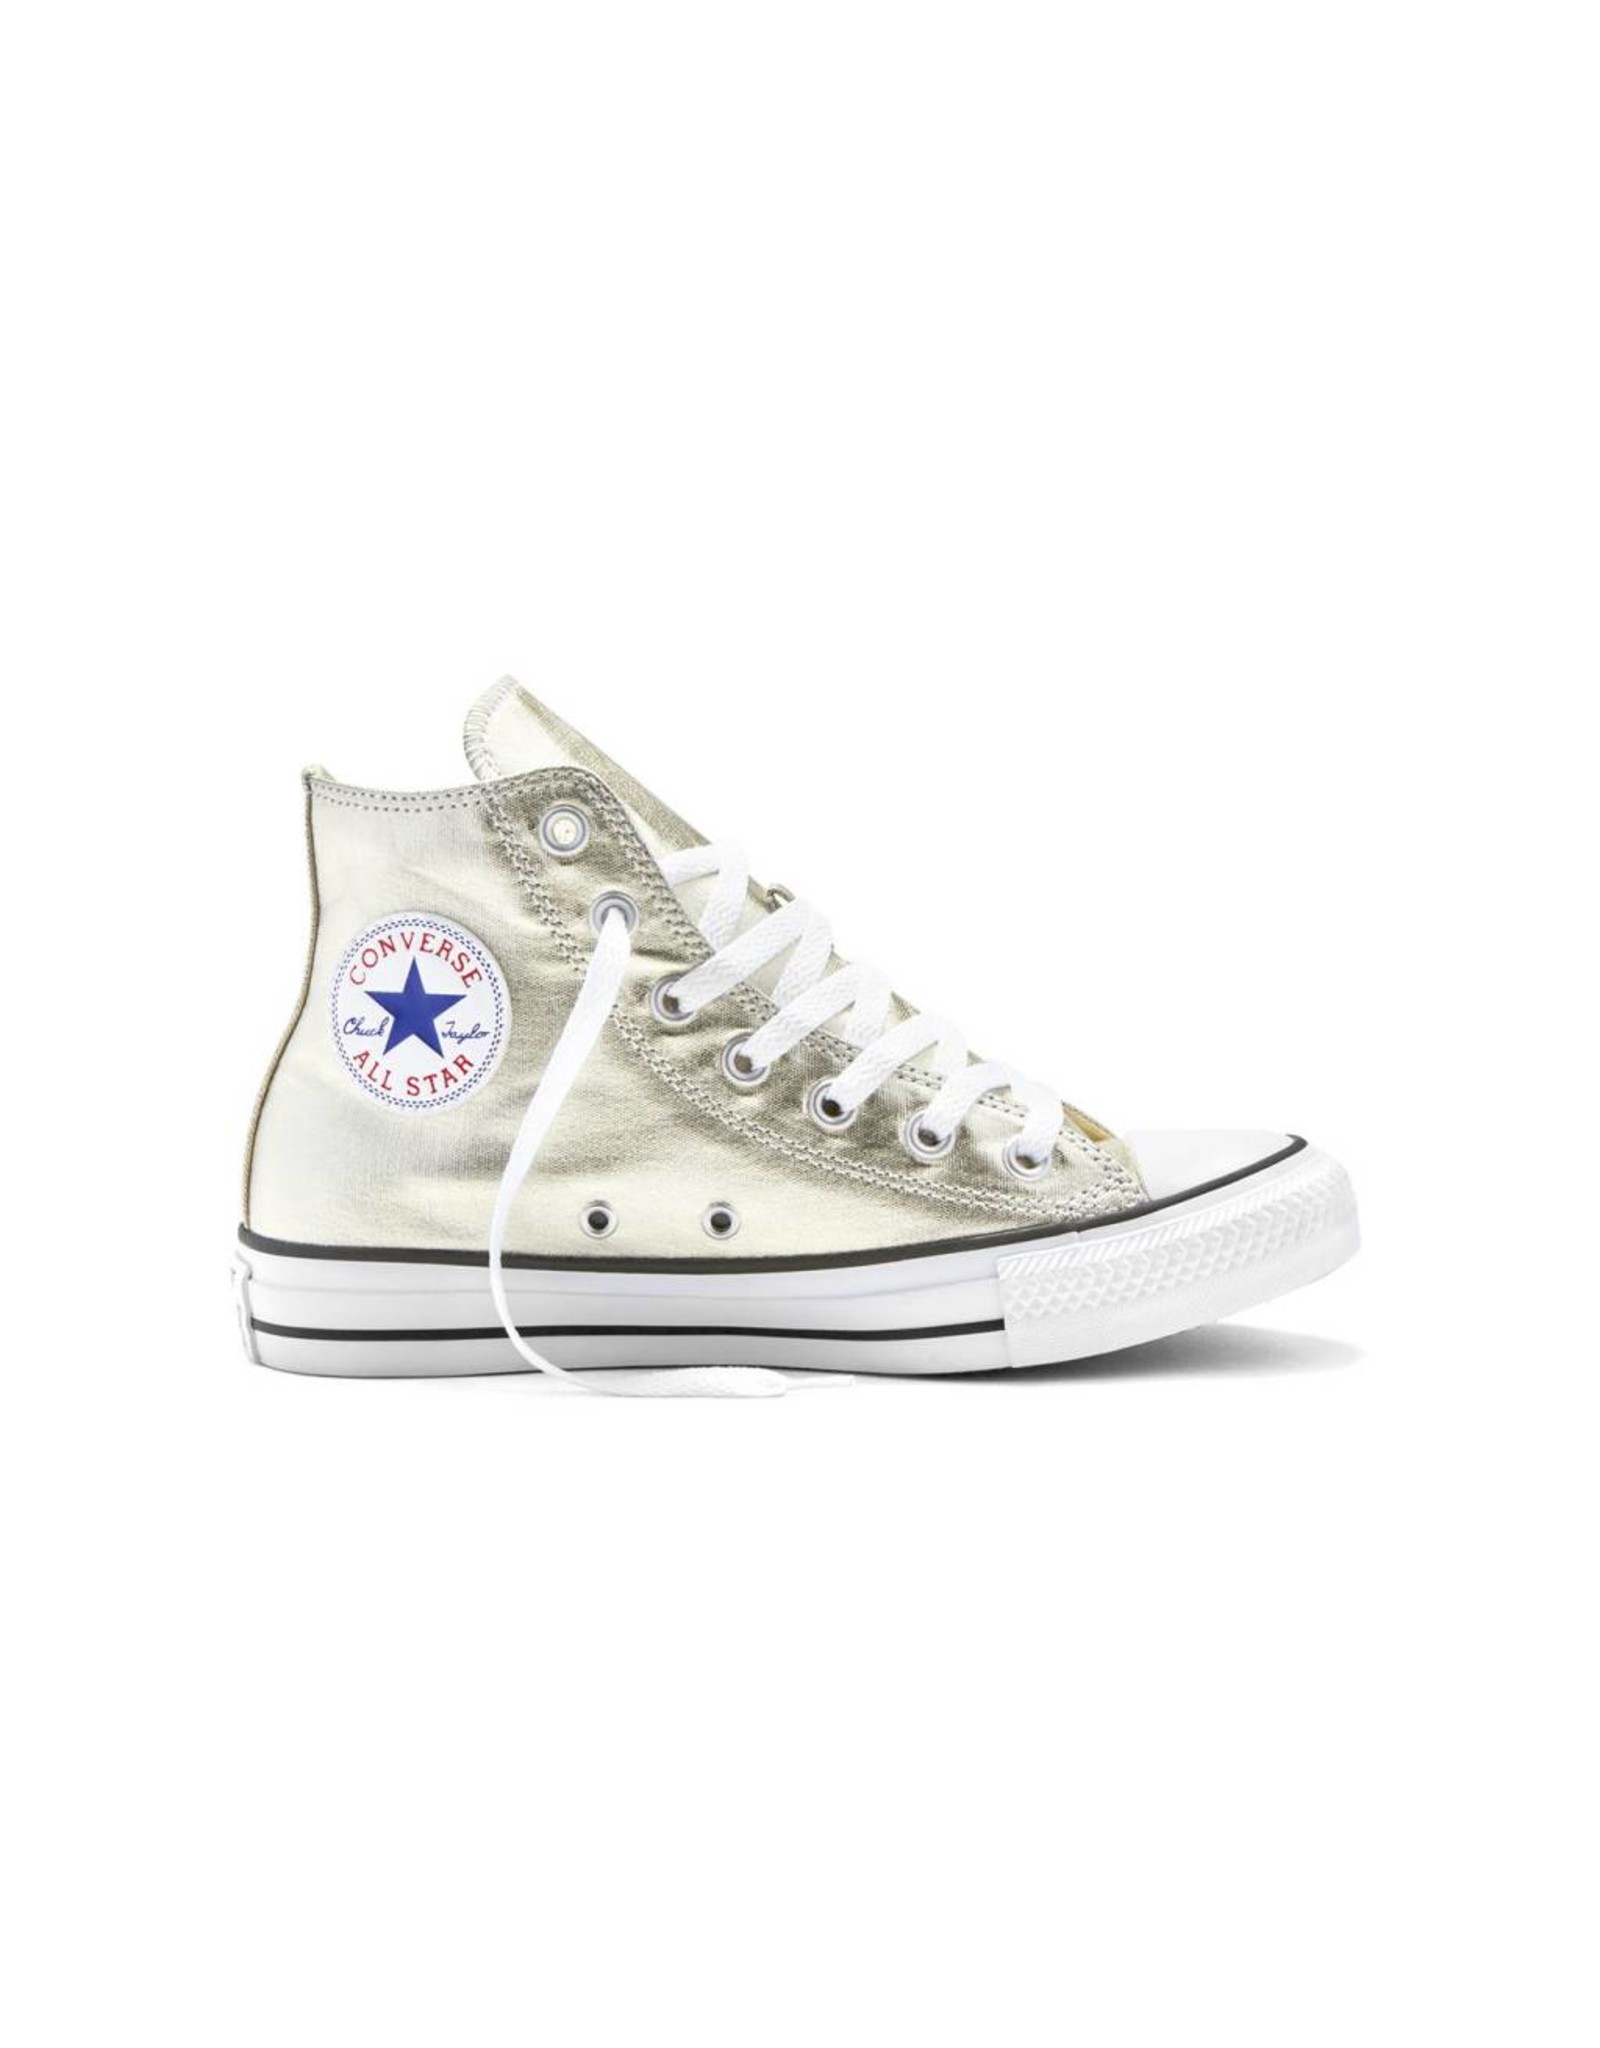 gold and white converse